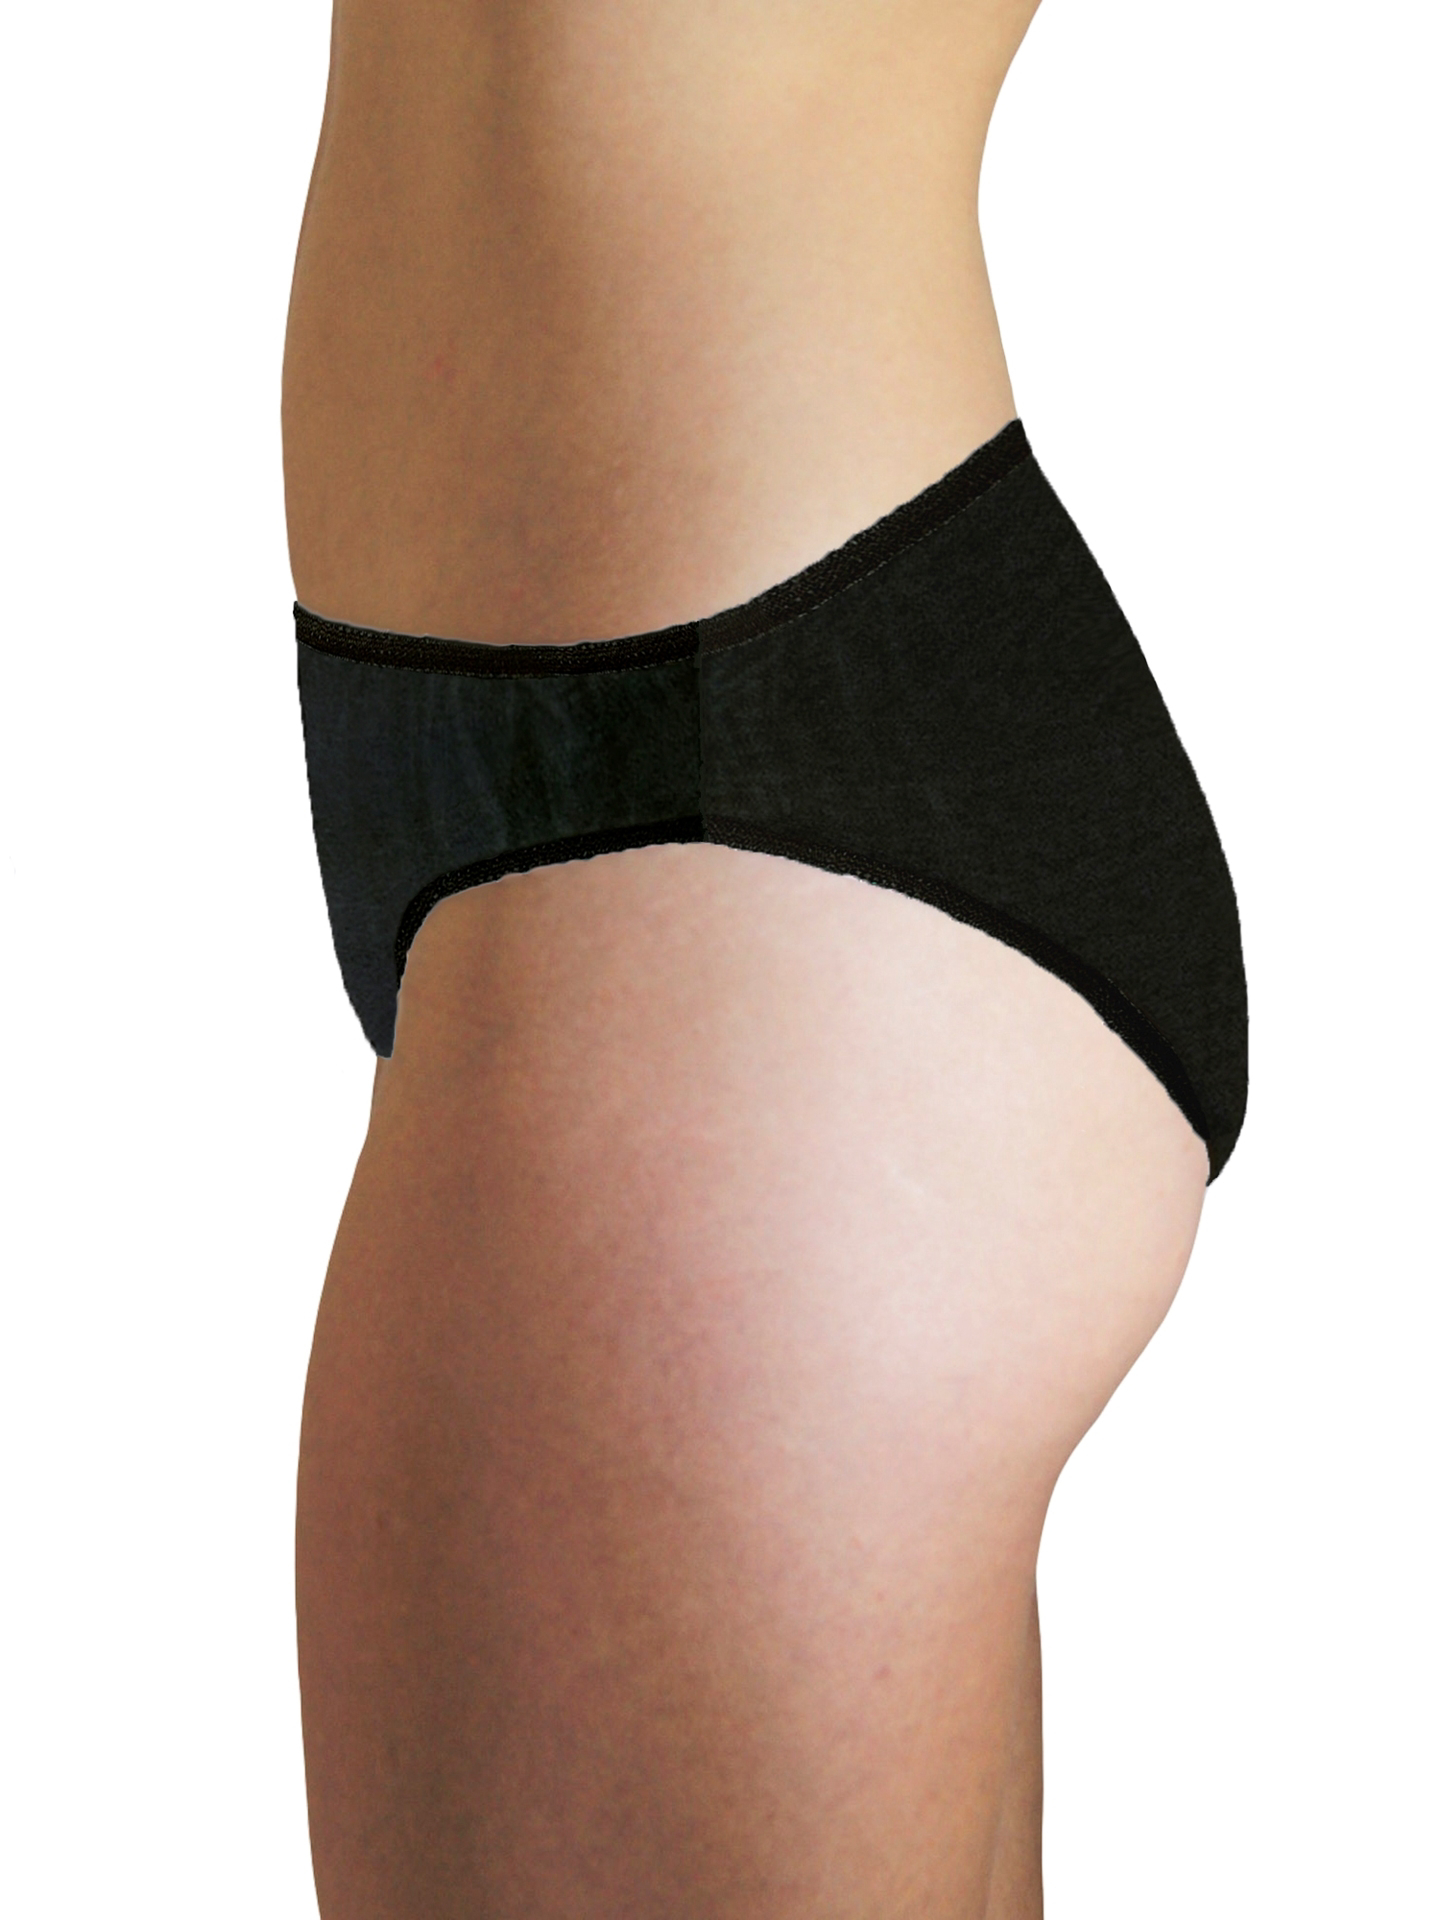 Women' S Disposable Underwear for Travel-Hospital Stays- 100% Cotton  Panties White - China Underwear and Panties price